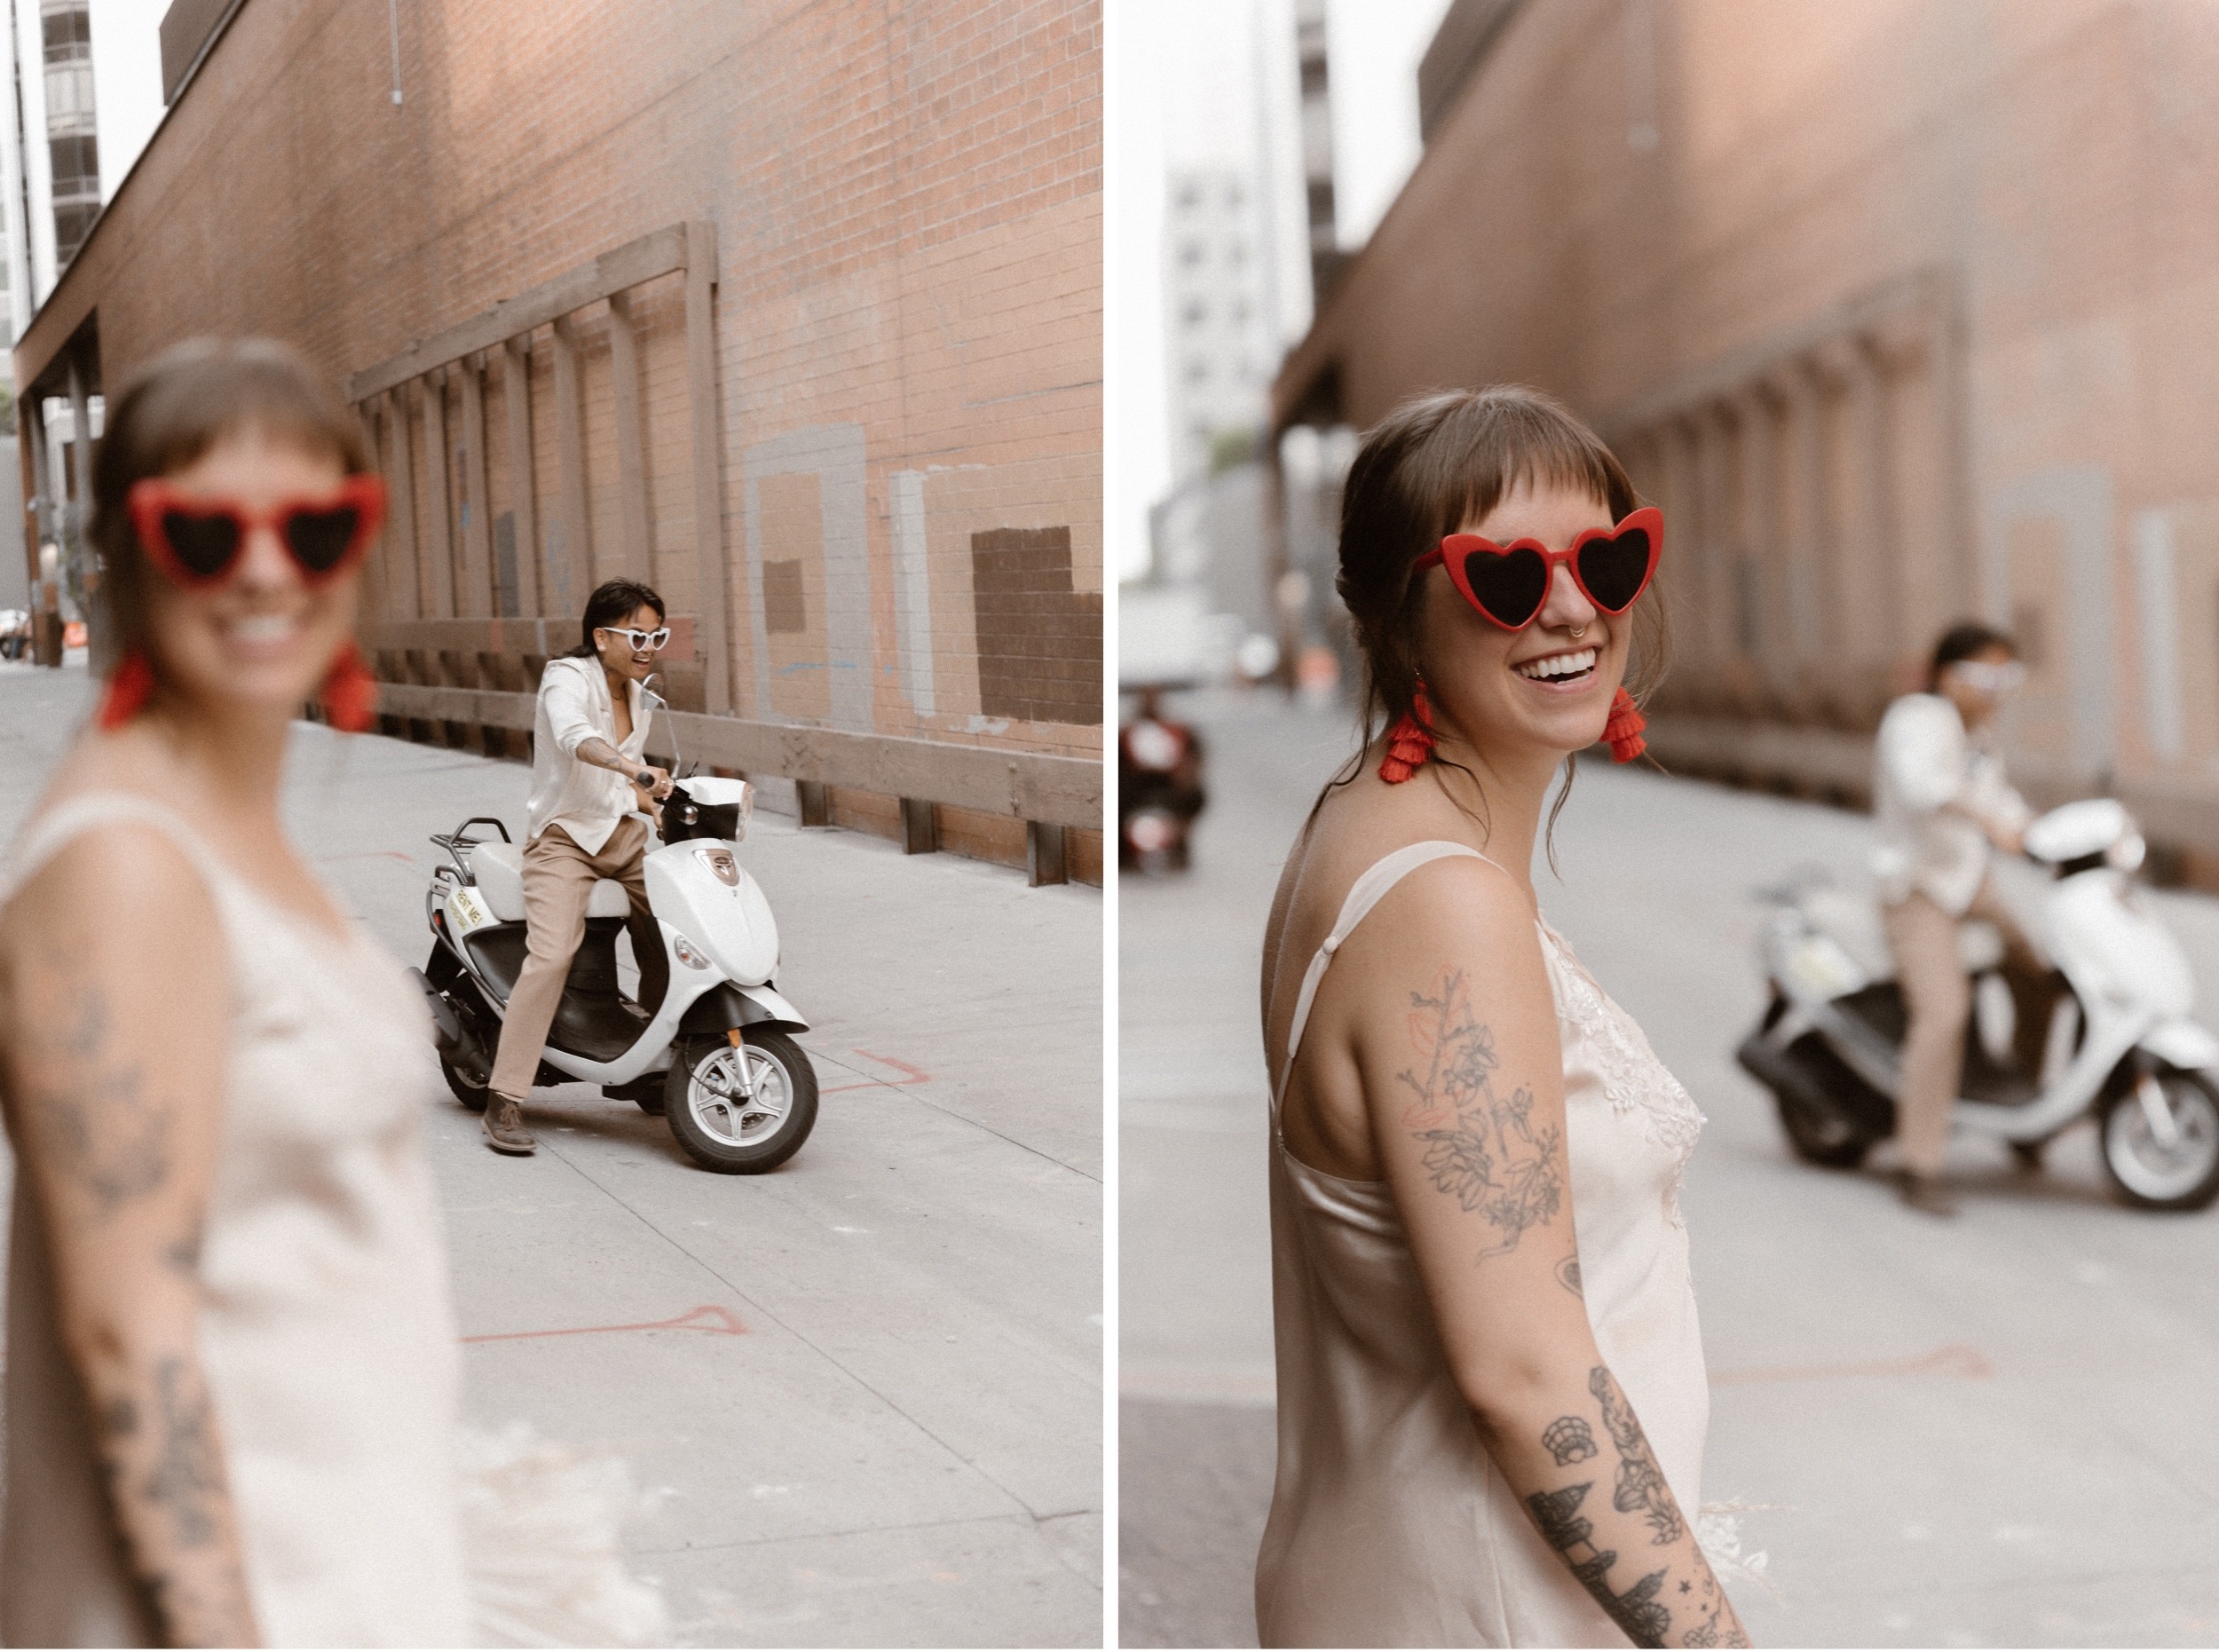 A romantic Italian-inspired downtown Denver elopement, complete with vintage outfits and an Italian scooter. Set in Larimer Square in downtown Denver. Photo by Denver elopement photographer, Ashley Joyce Photography, copyright 2022.